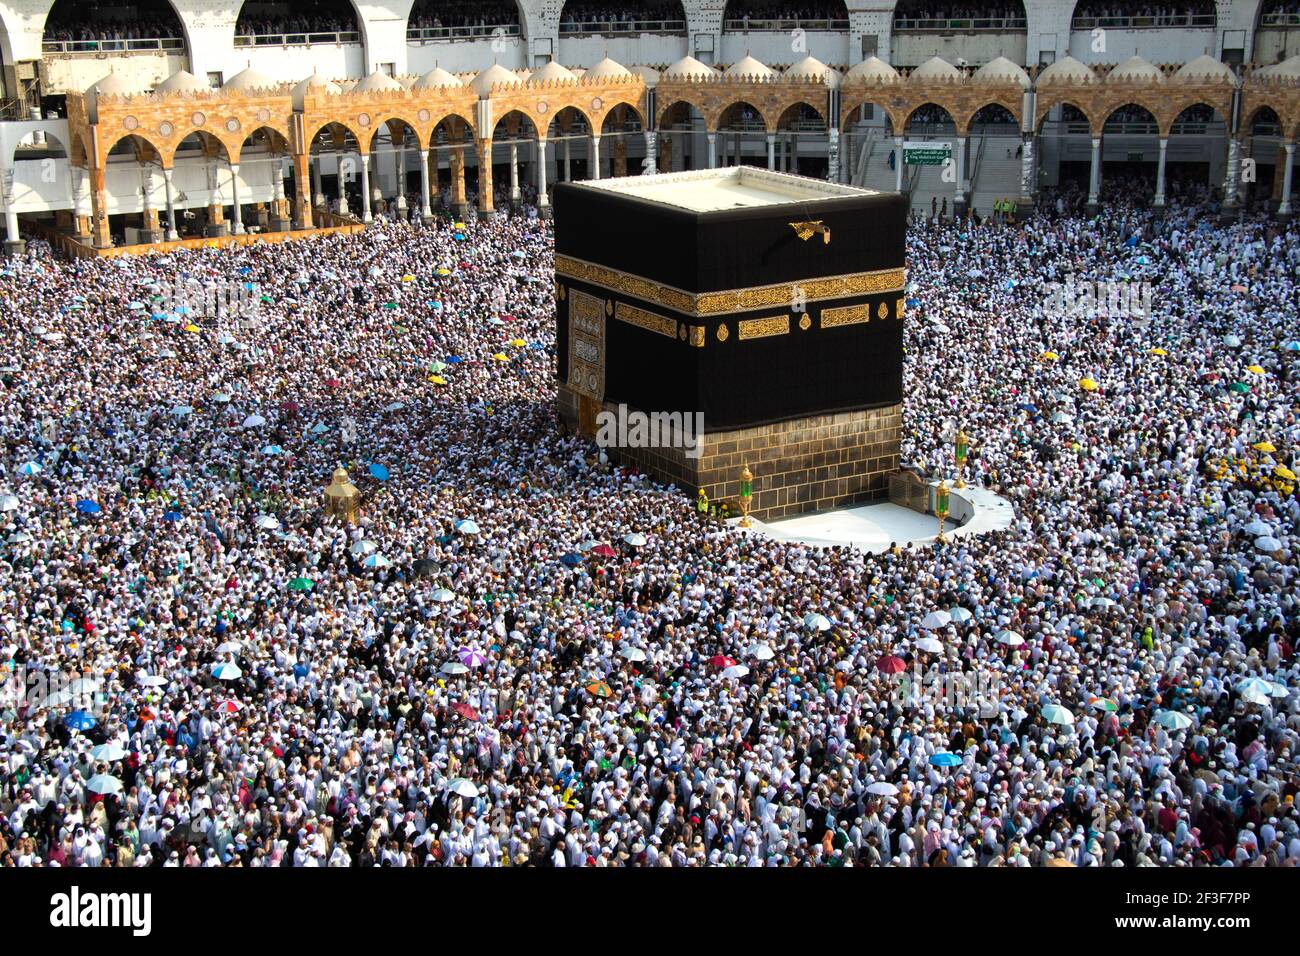 Muslim pilgrims revolving around the Kaaba in Mecca Saudi Arabia. Muslim people praying together at holy place. Stock Photo